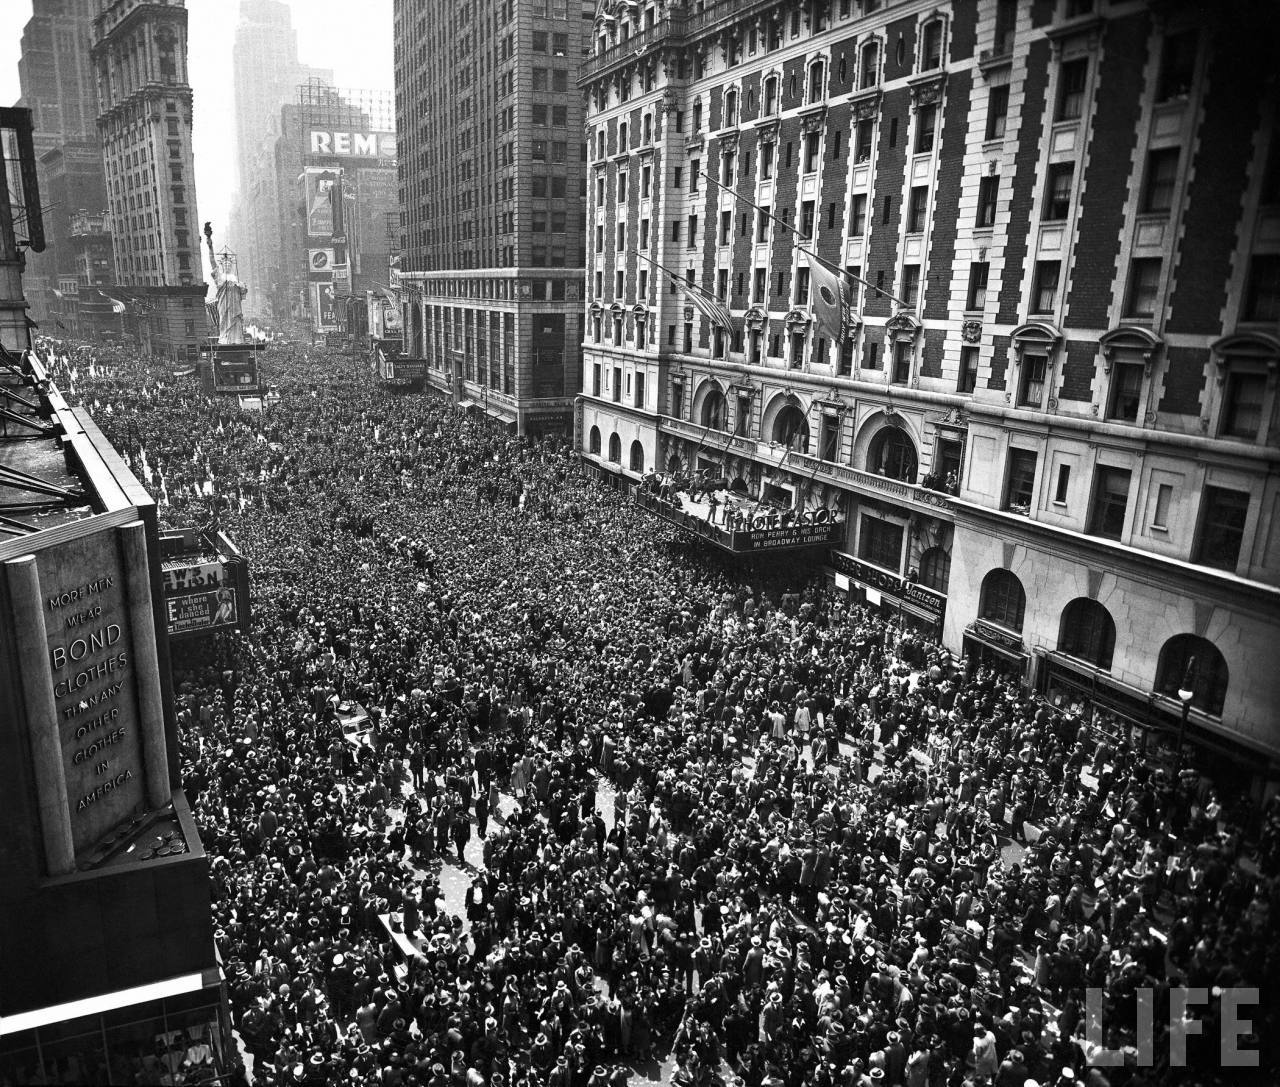 Huge+crowd+gathered+in+Times+Square+to+celebrate+VE-Day,+the+end+of+WWII+in+Europe.May+08,+1945.%C2%A9+Time+Inc.Herbert+Gehr.jpg